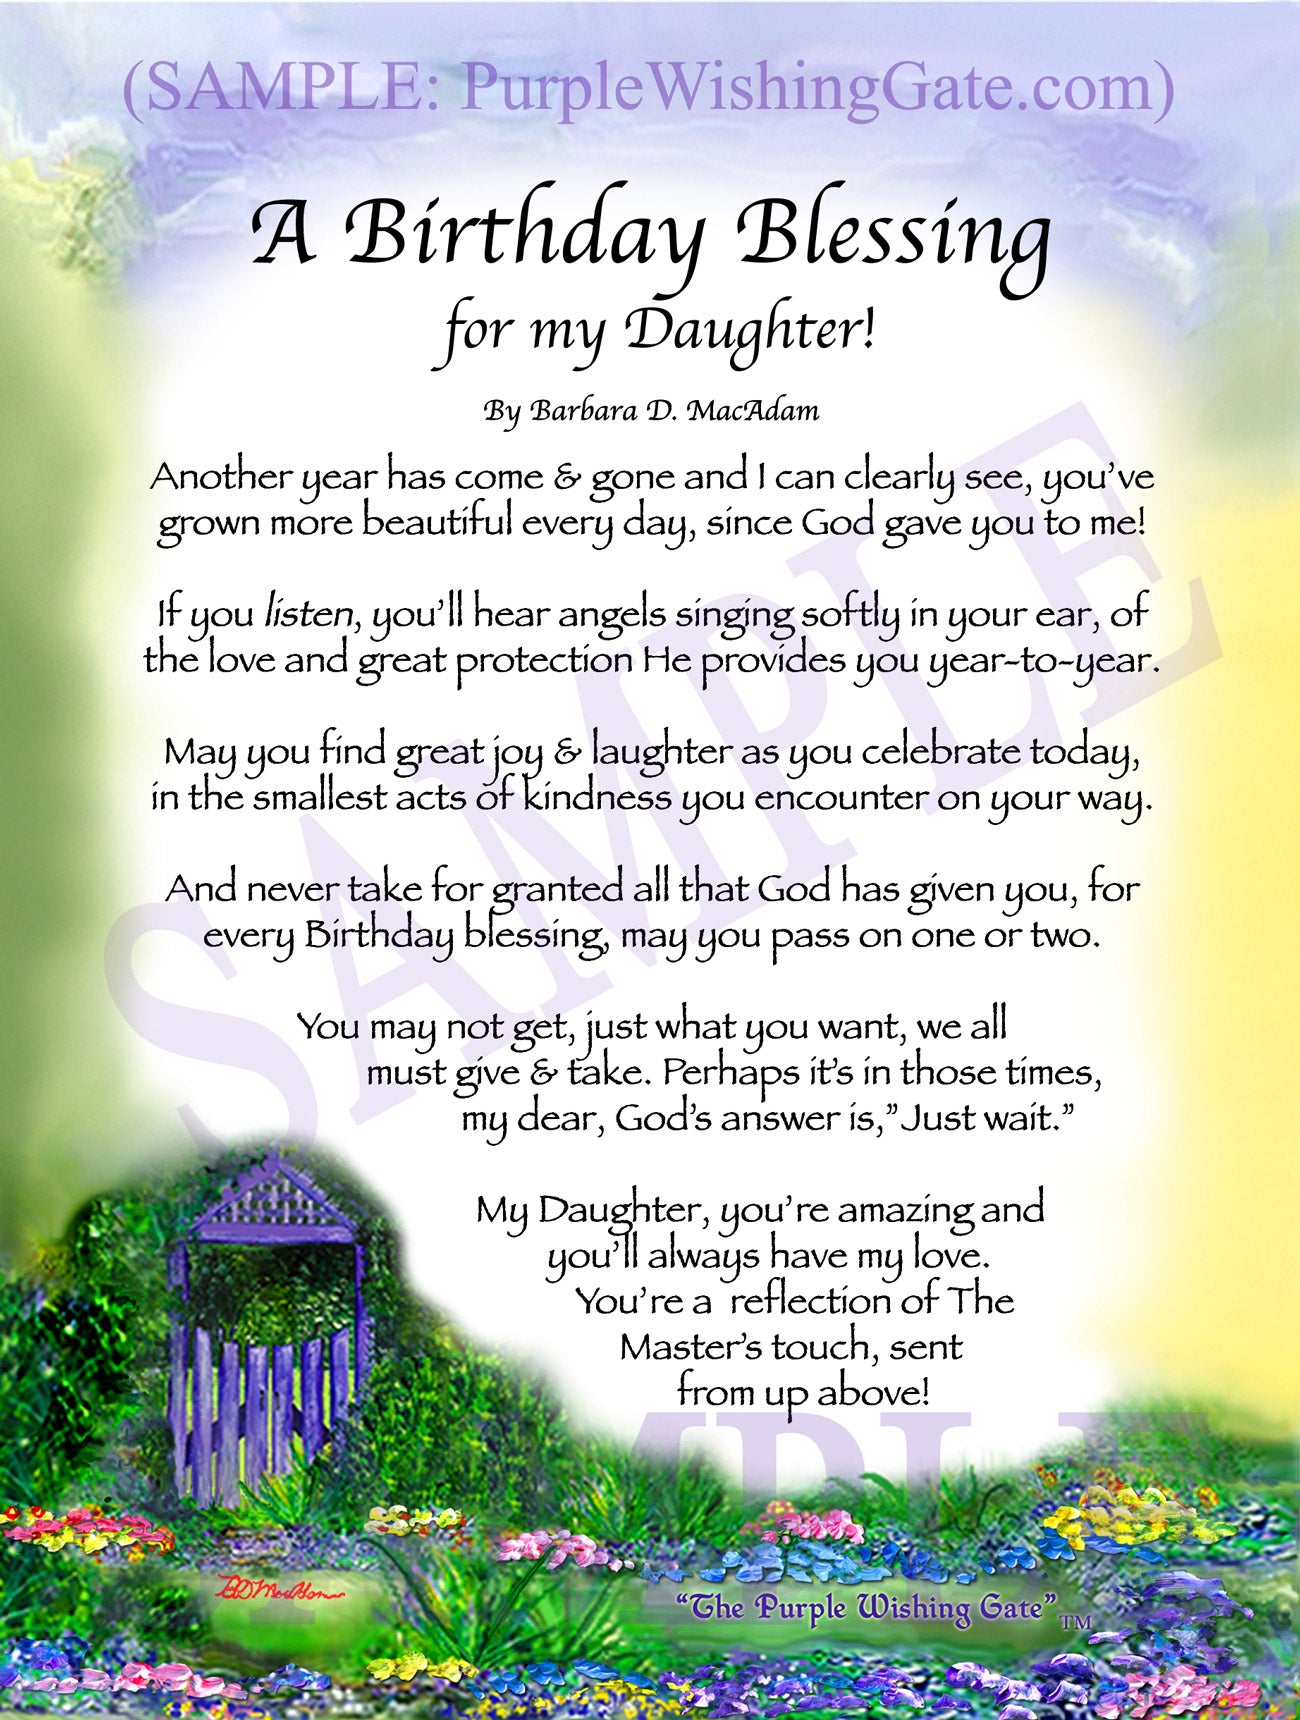 
              
        		A Birthday Blessing for my Daughter! - Birthday Gift - PurpleWishingGate.com
        		
        	